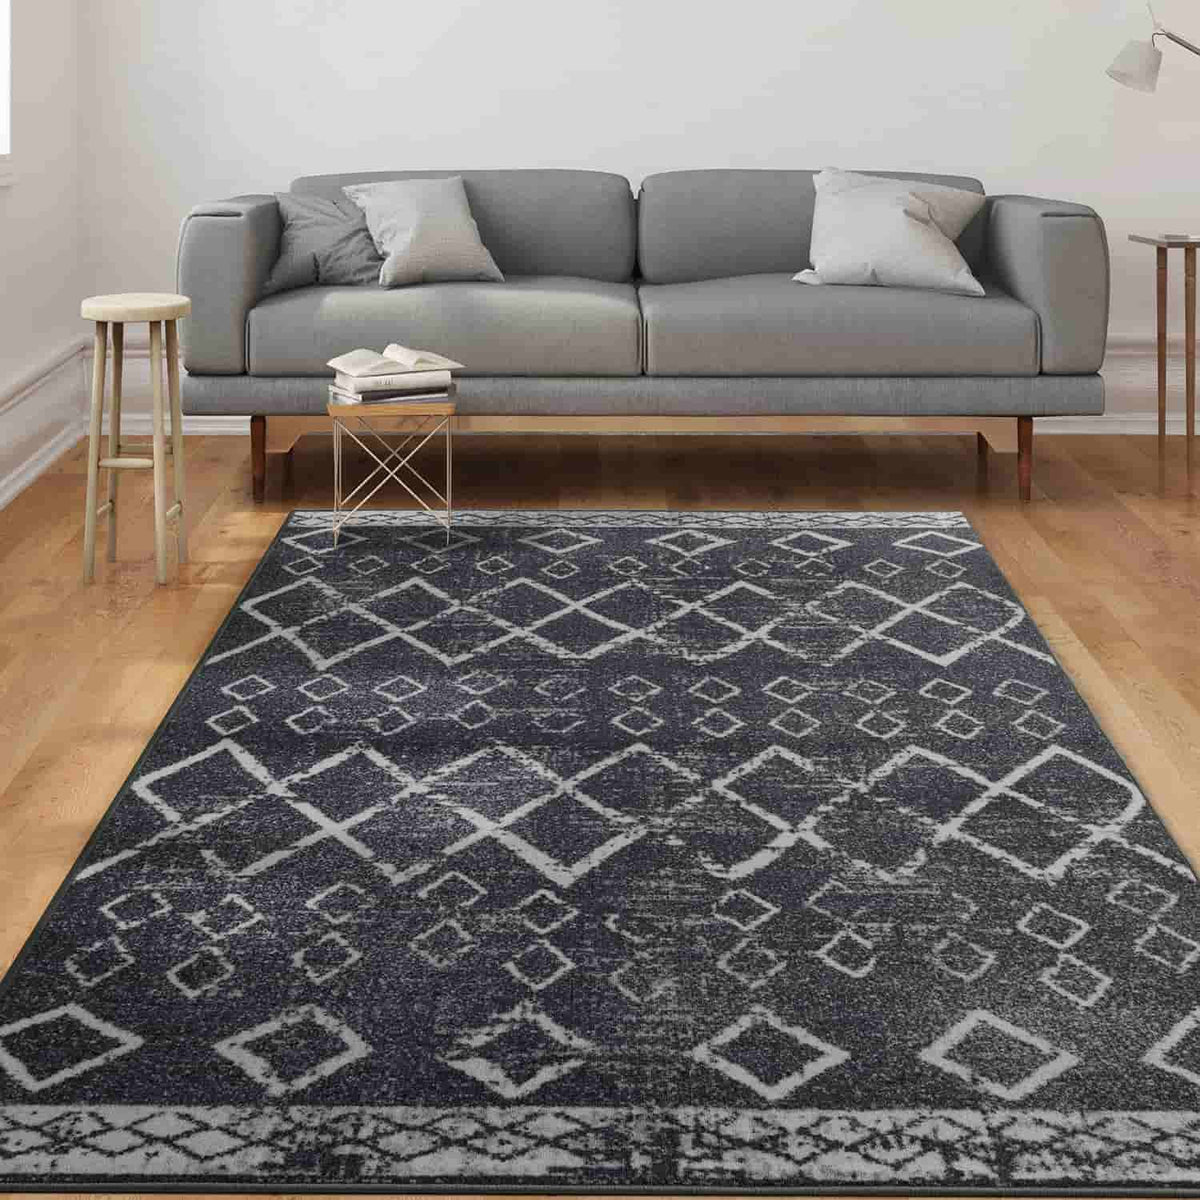 Antep Rugs Alfombras Non-Skid (Non-Slip) 2x4 Rubber Backing Floral  Geometric Low Profile Pile Kitchen Area Rugs (Dark Green, 2'3 x 4')